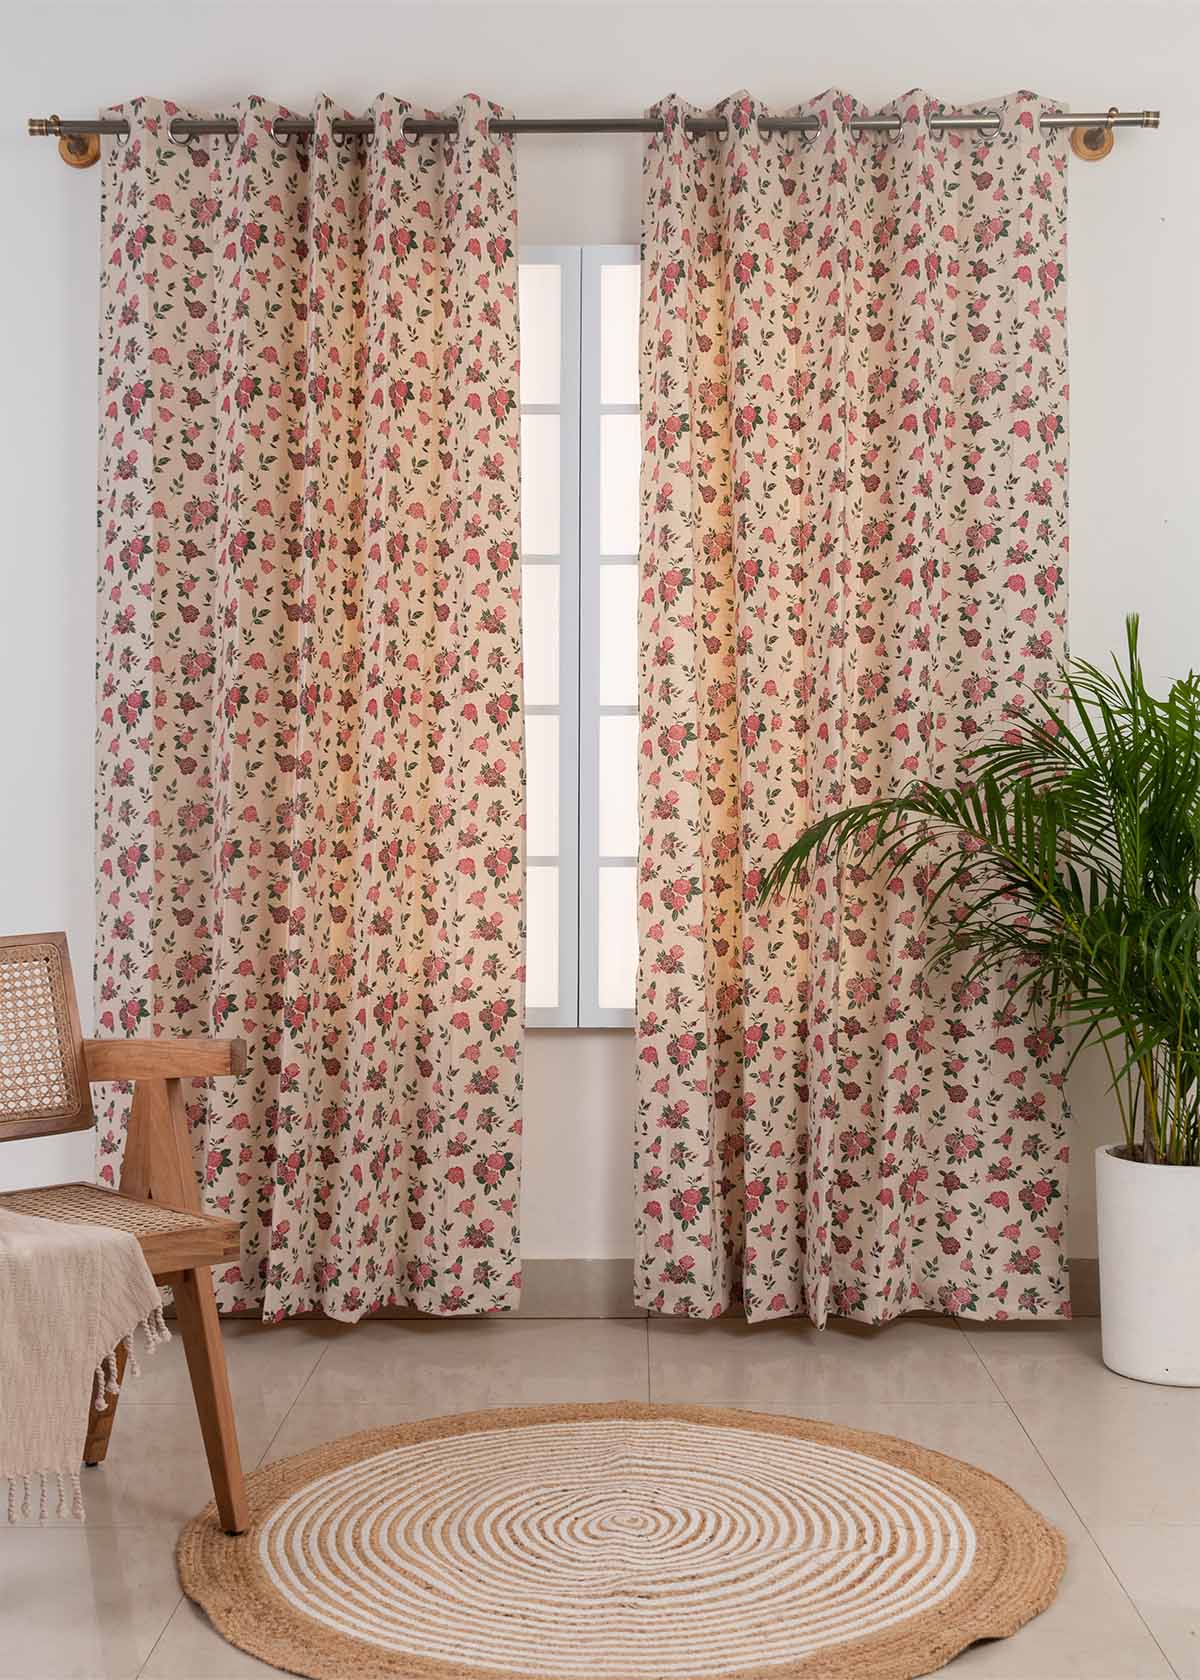 Wild Roses 100% cotton floral curtain for Living room & bed room - Room darkening - Pack of 1